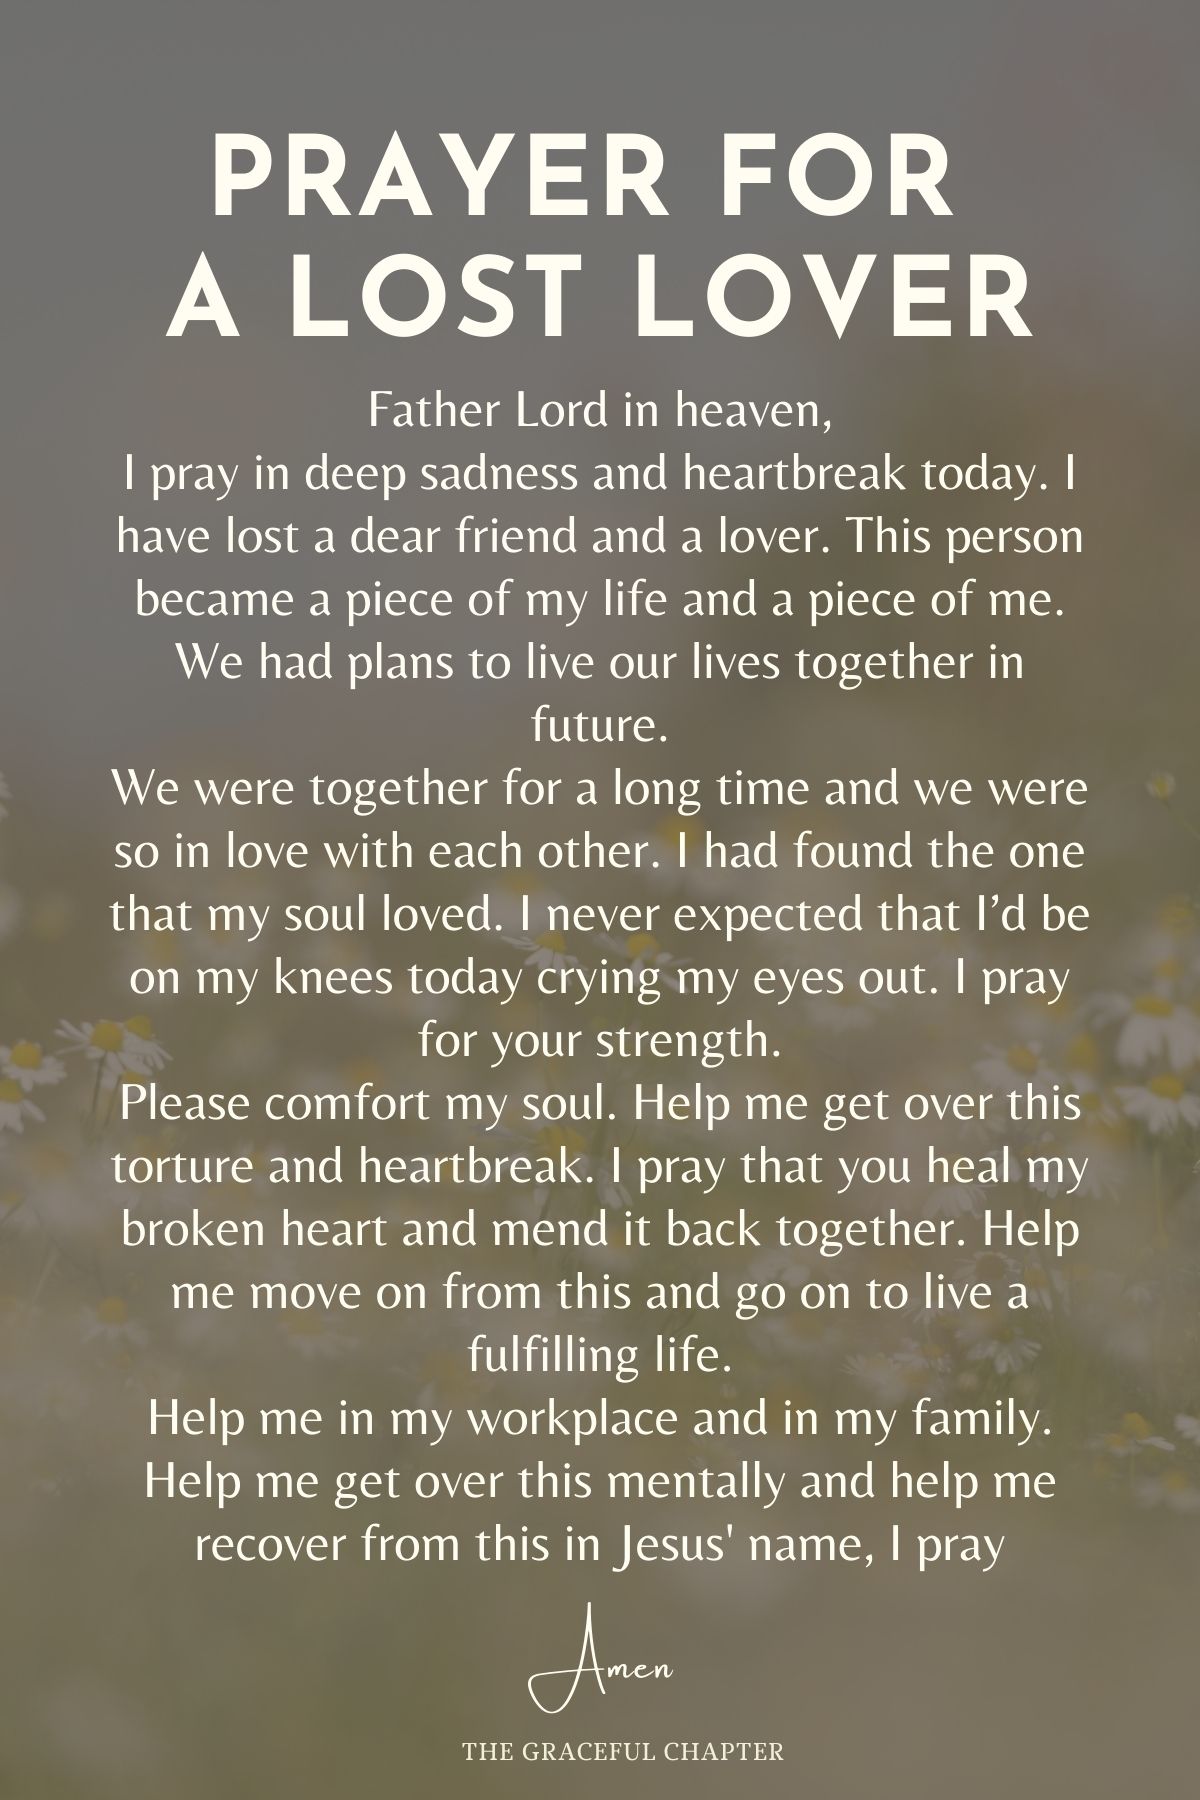 Prayer for a lost lover